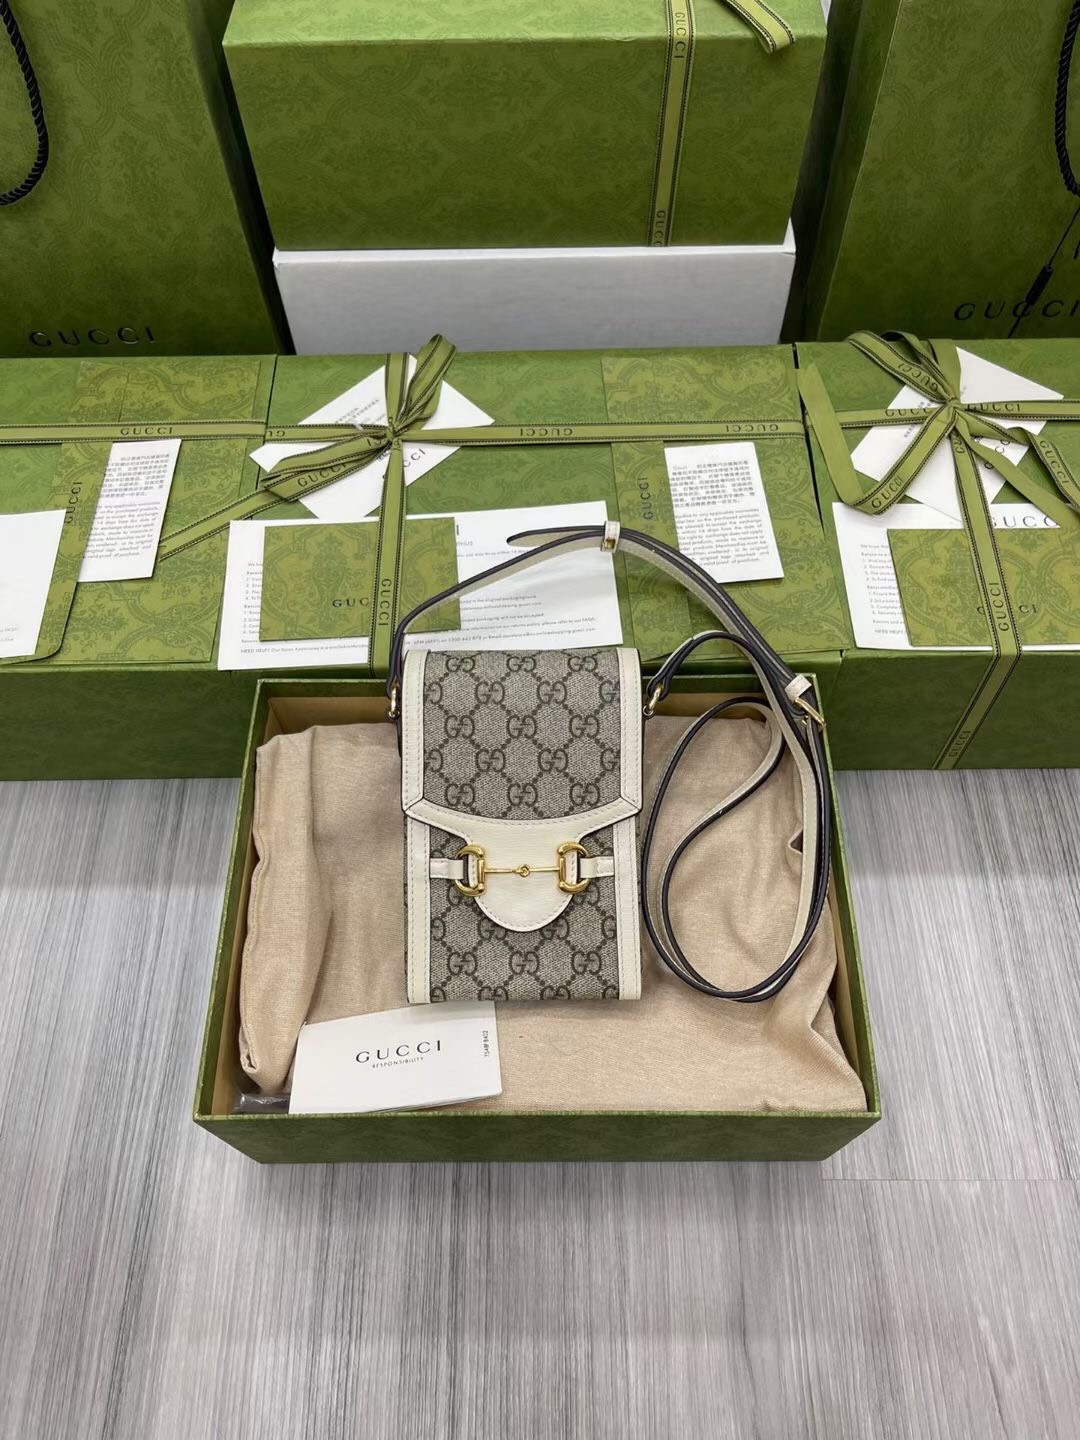 Gucci 1955 Horsebit 625615 White - Replica Bags and Shoes online Store ...